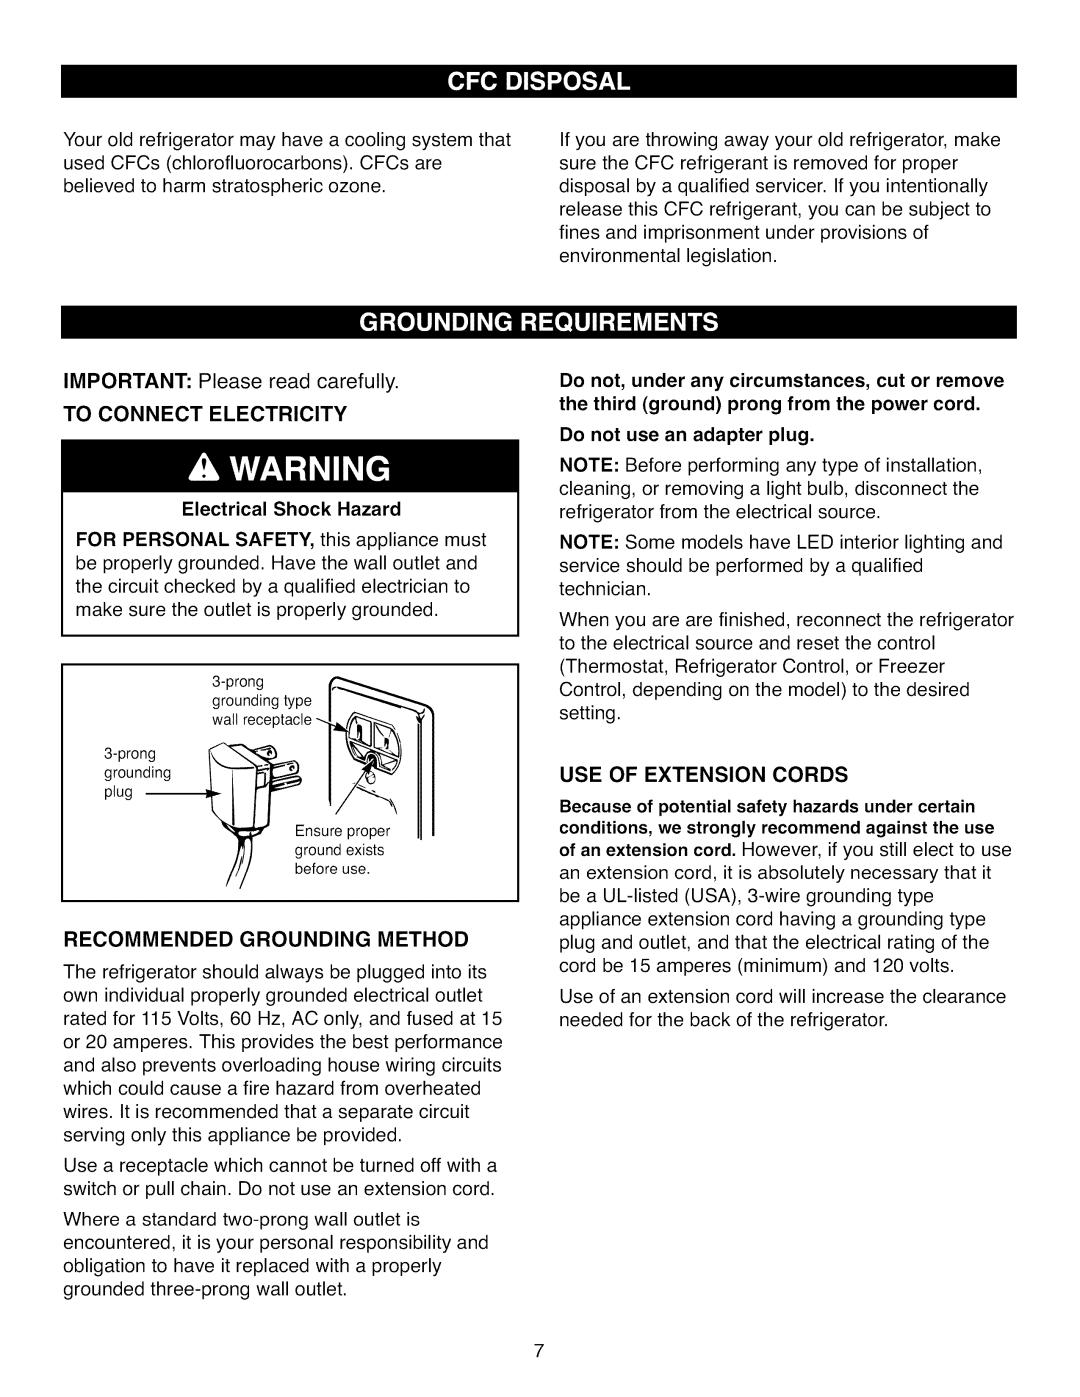 Kenmore 795.7105 manual IMPORTANT: Please read carefully, To Connect Electricity, Recommended Grounding Method 